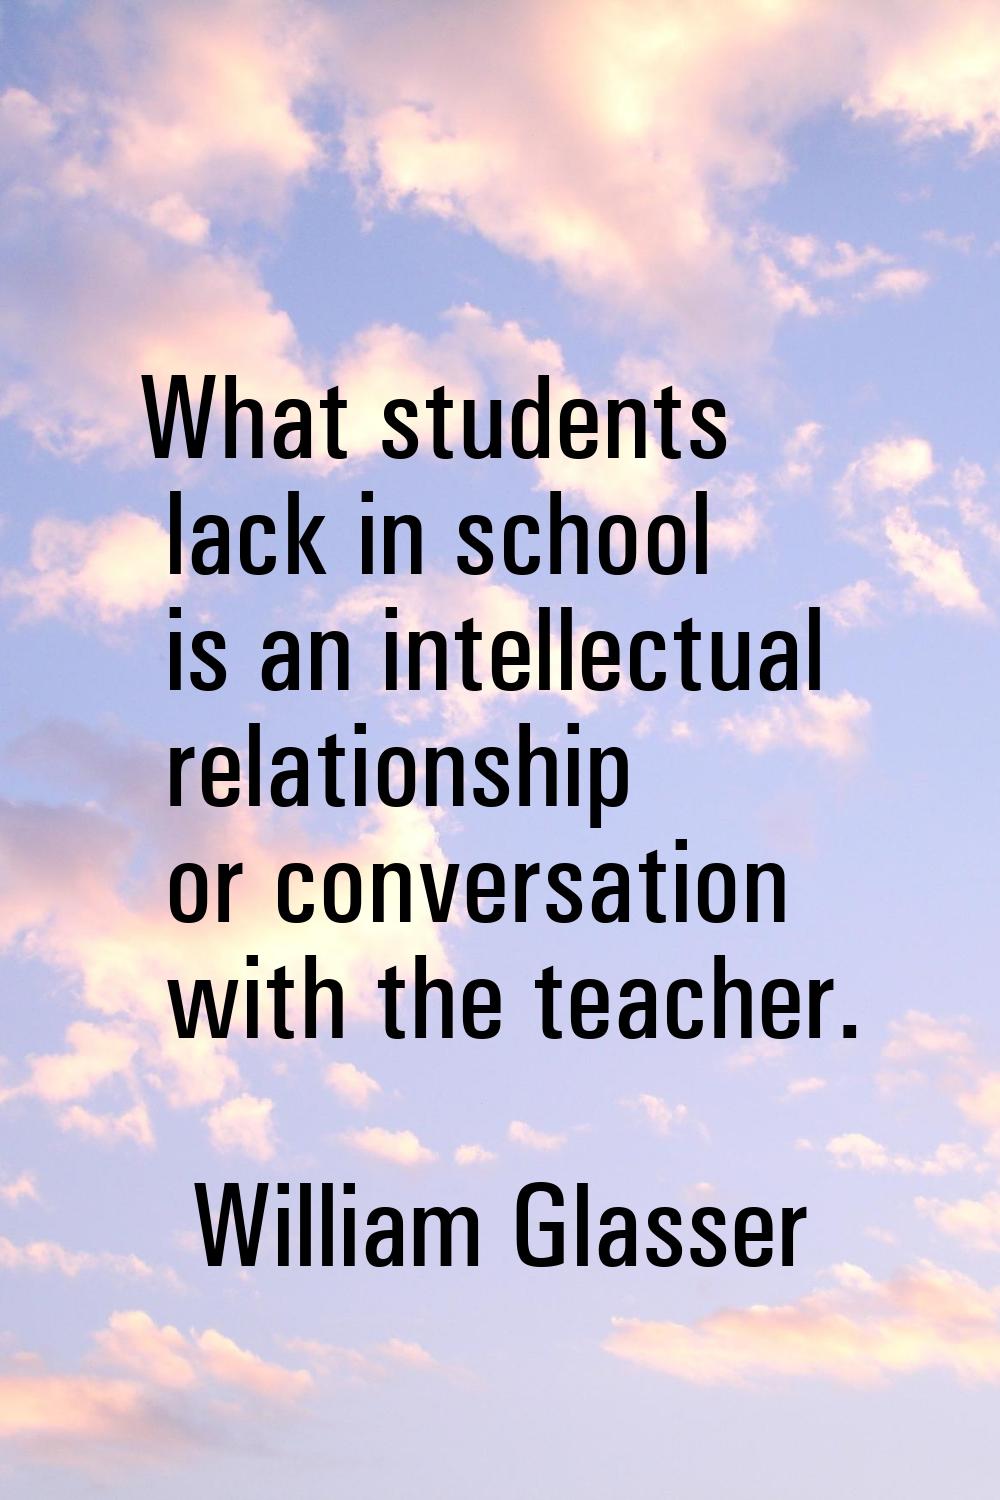 What students lack in school is an intellectual relationship or conversation with the teacher.